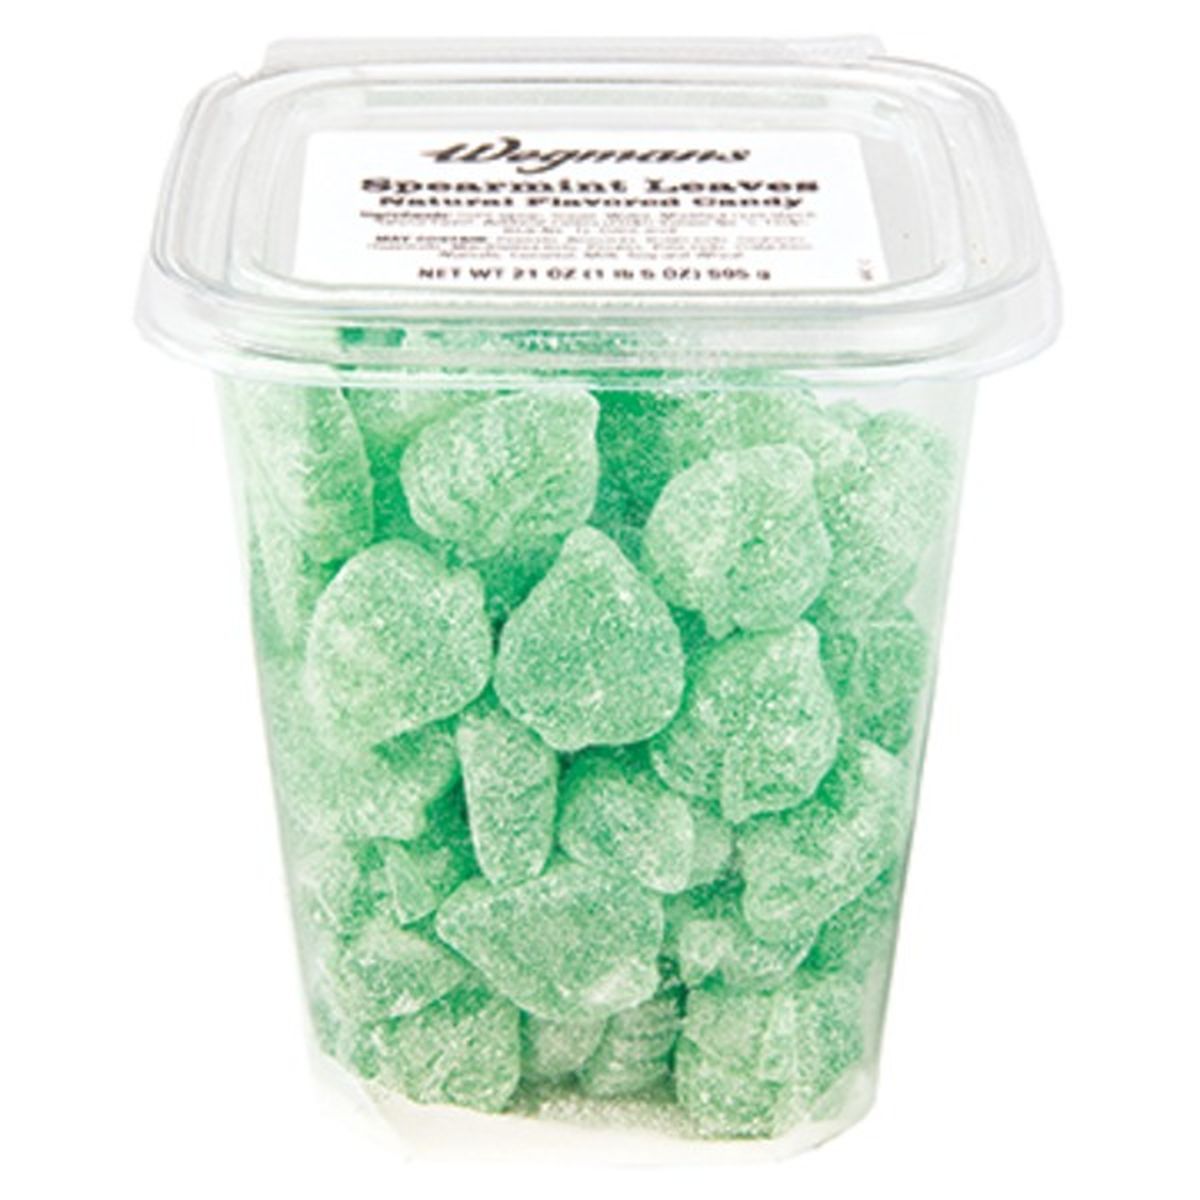 Calories in Wegmans Spearmint Leaves Candy